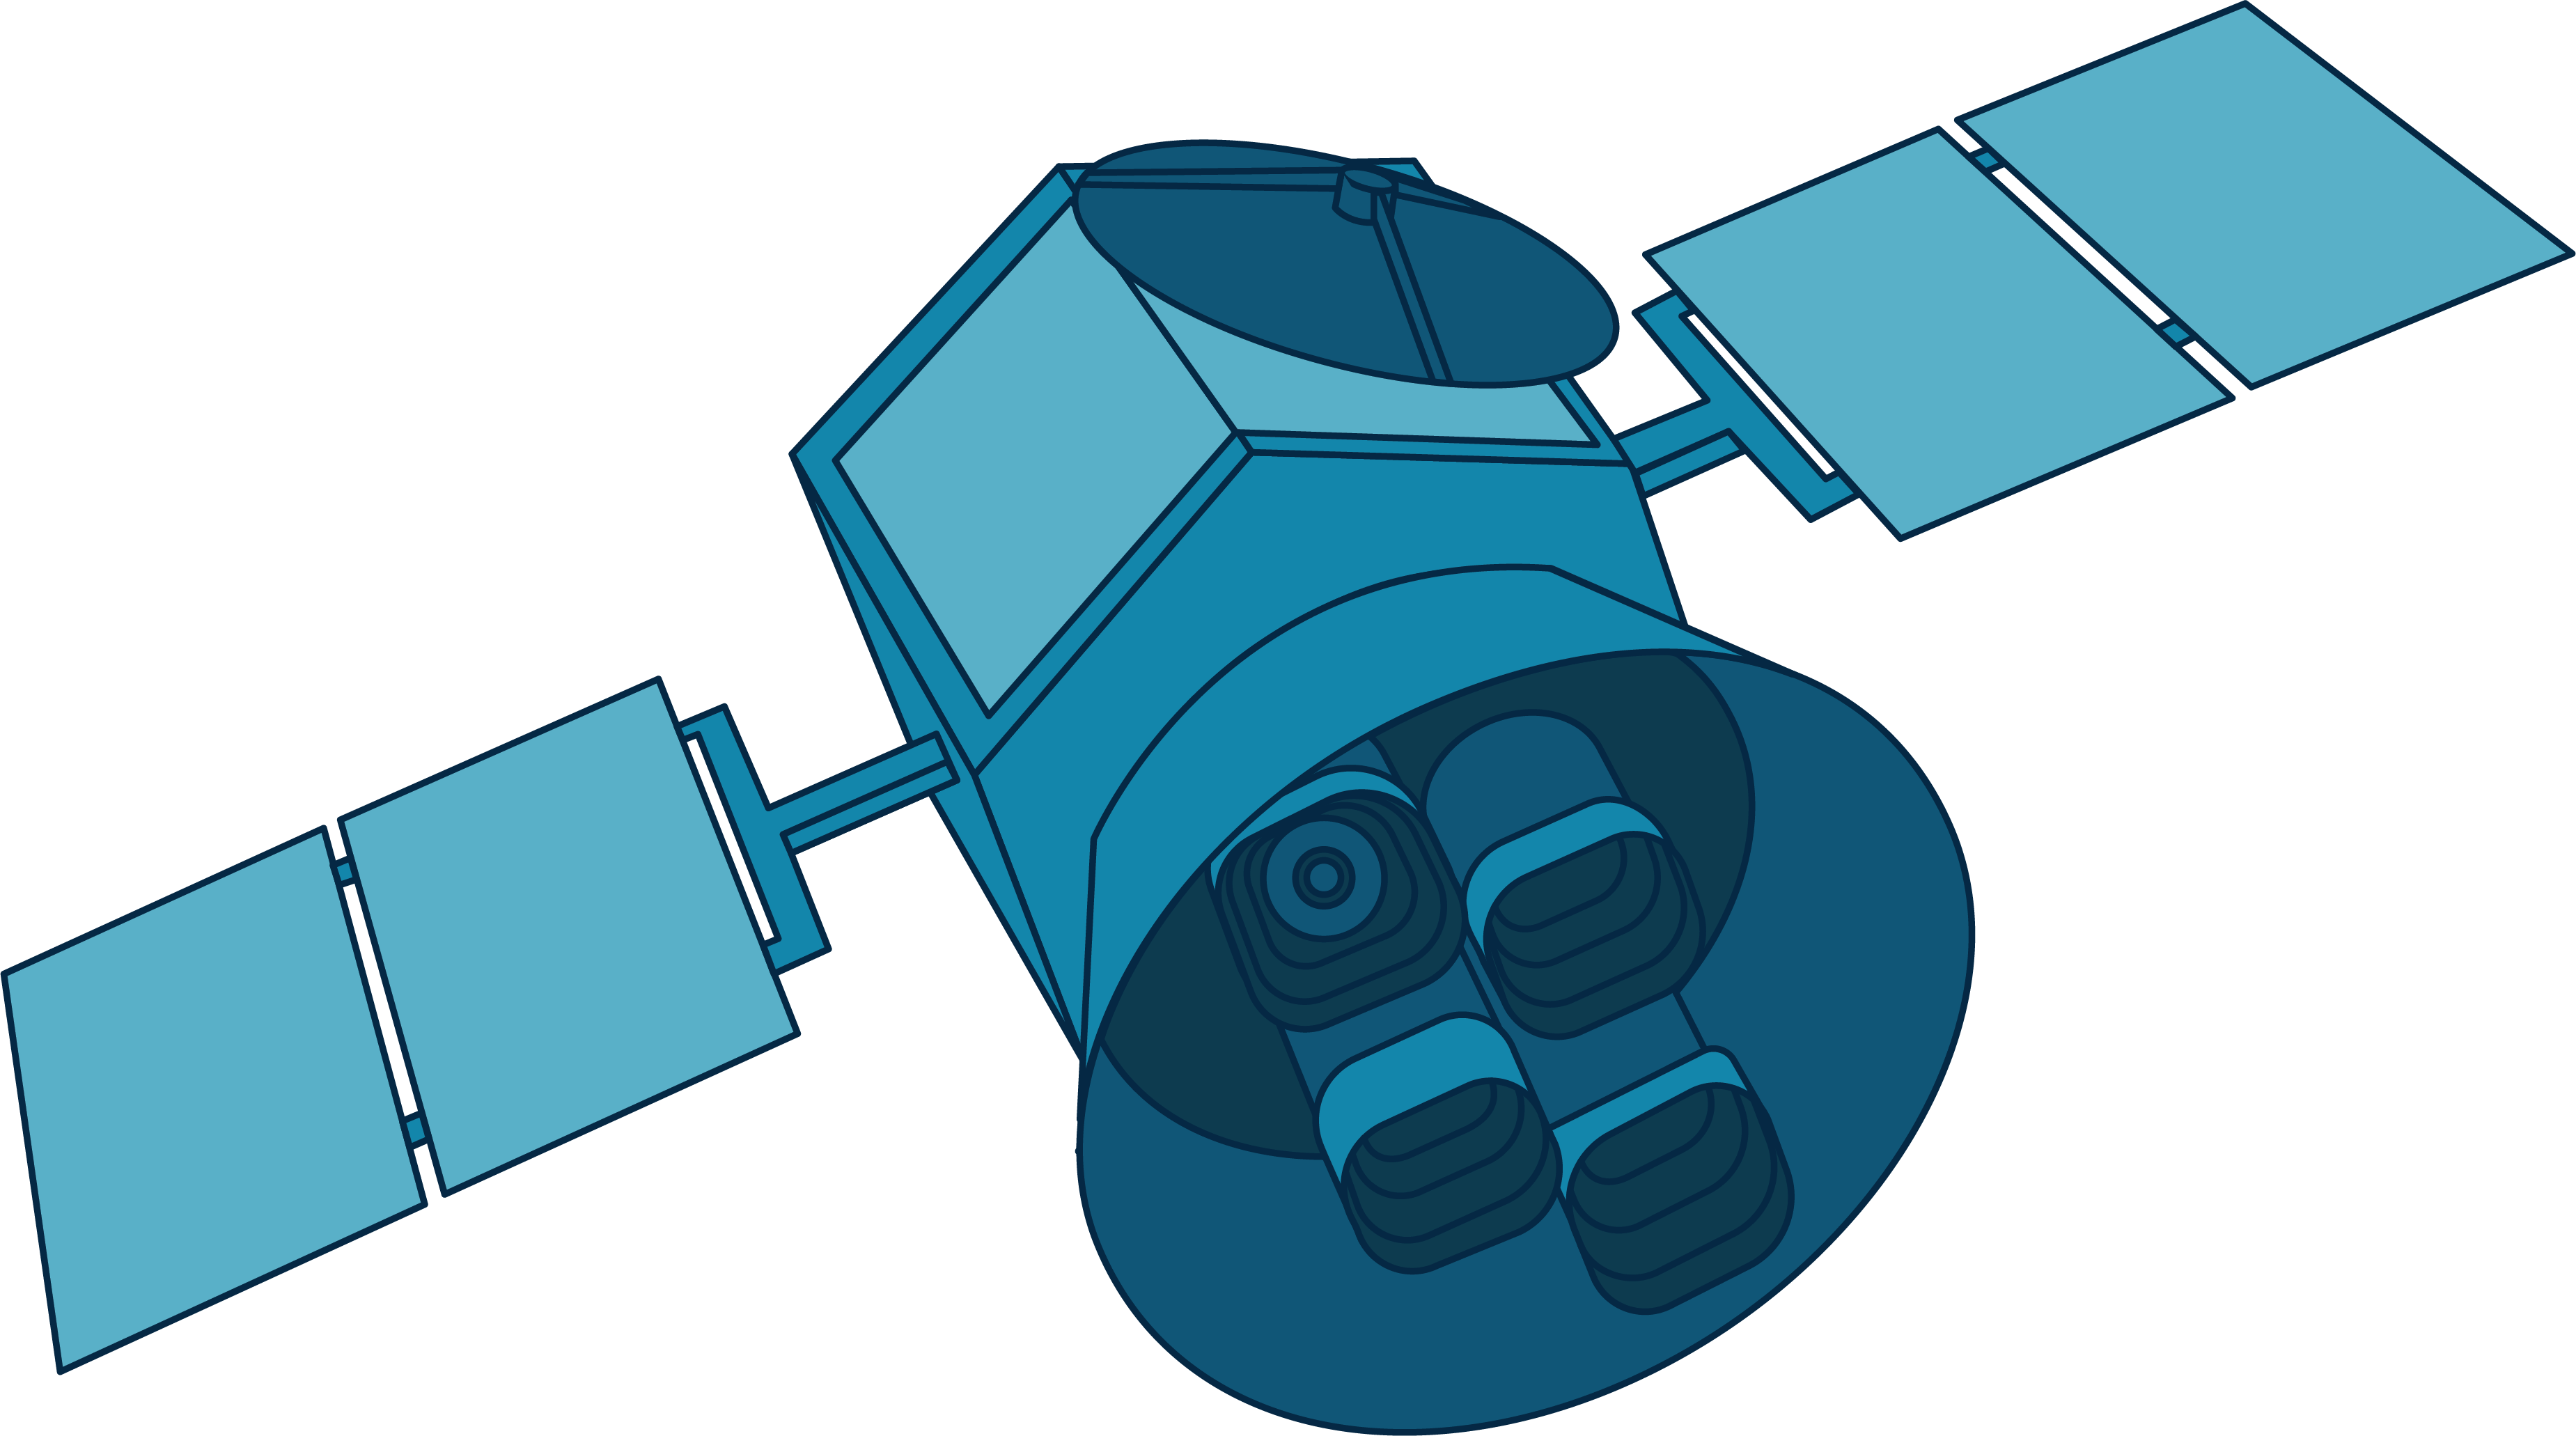 This illustration of NASA's TESS shows the spacecraft in shades of blue. The multi-sided, cylindrical shaped main body of the satellite has two solar array "wings," each extending out from the sides of the satellite which is attached to an open, cone shaped bottom piece. Nestled inside the cone are four squares which show the relative positions of TESS’s cameras.